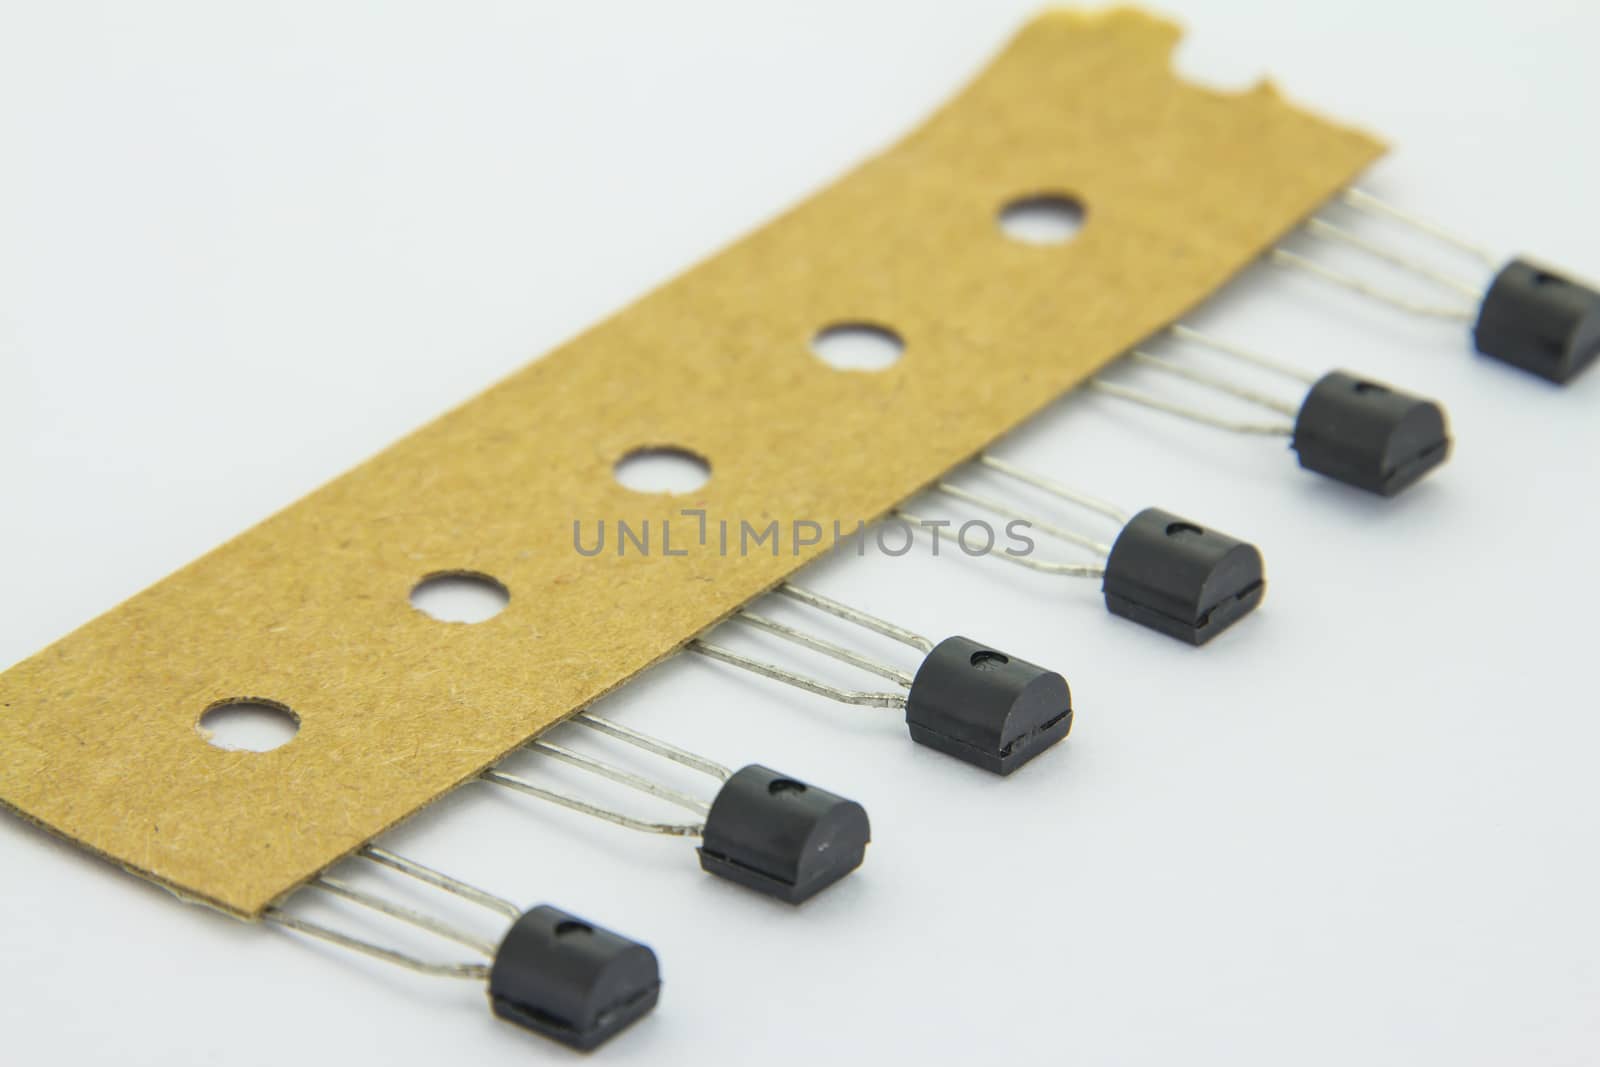 The old transistors with reel package on the white background by peerapixs